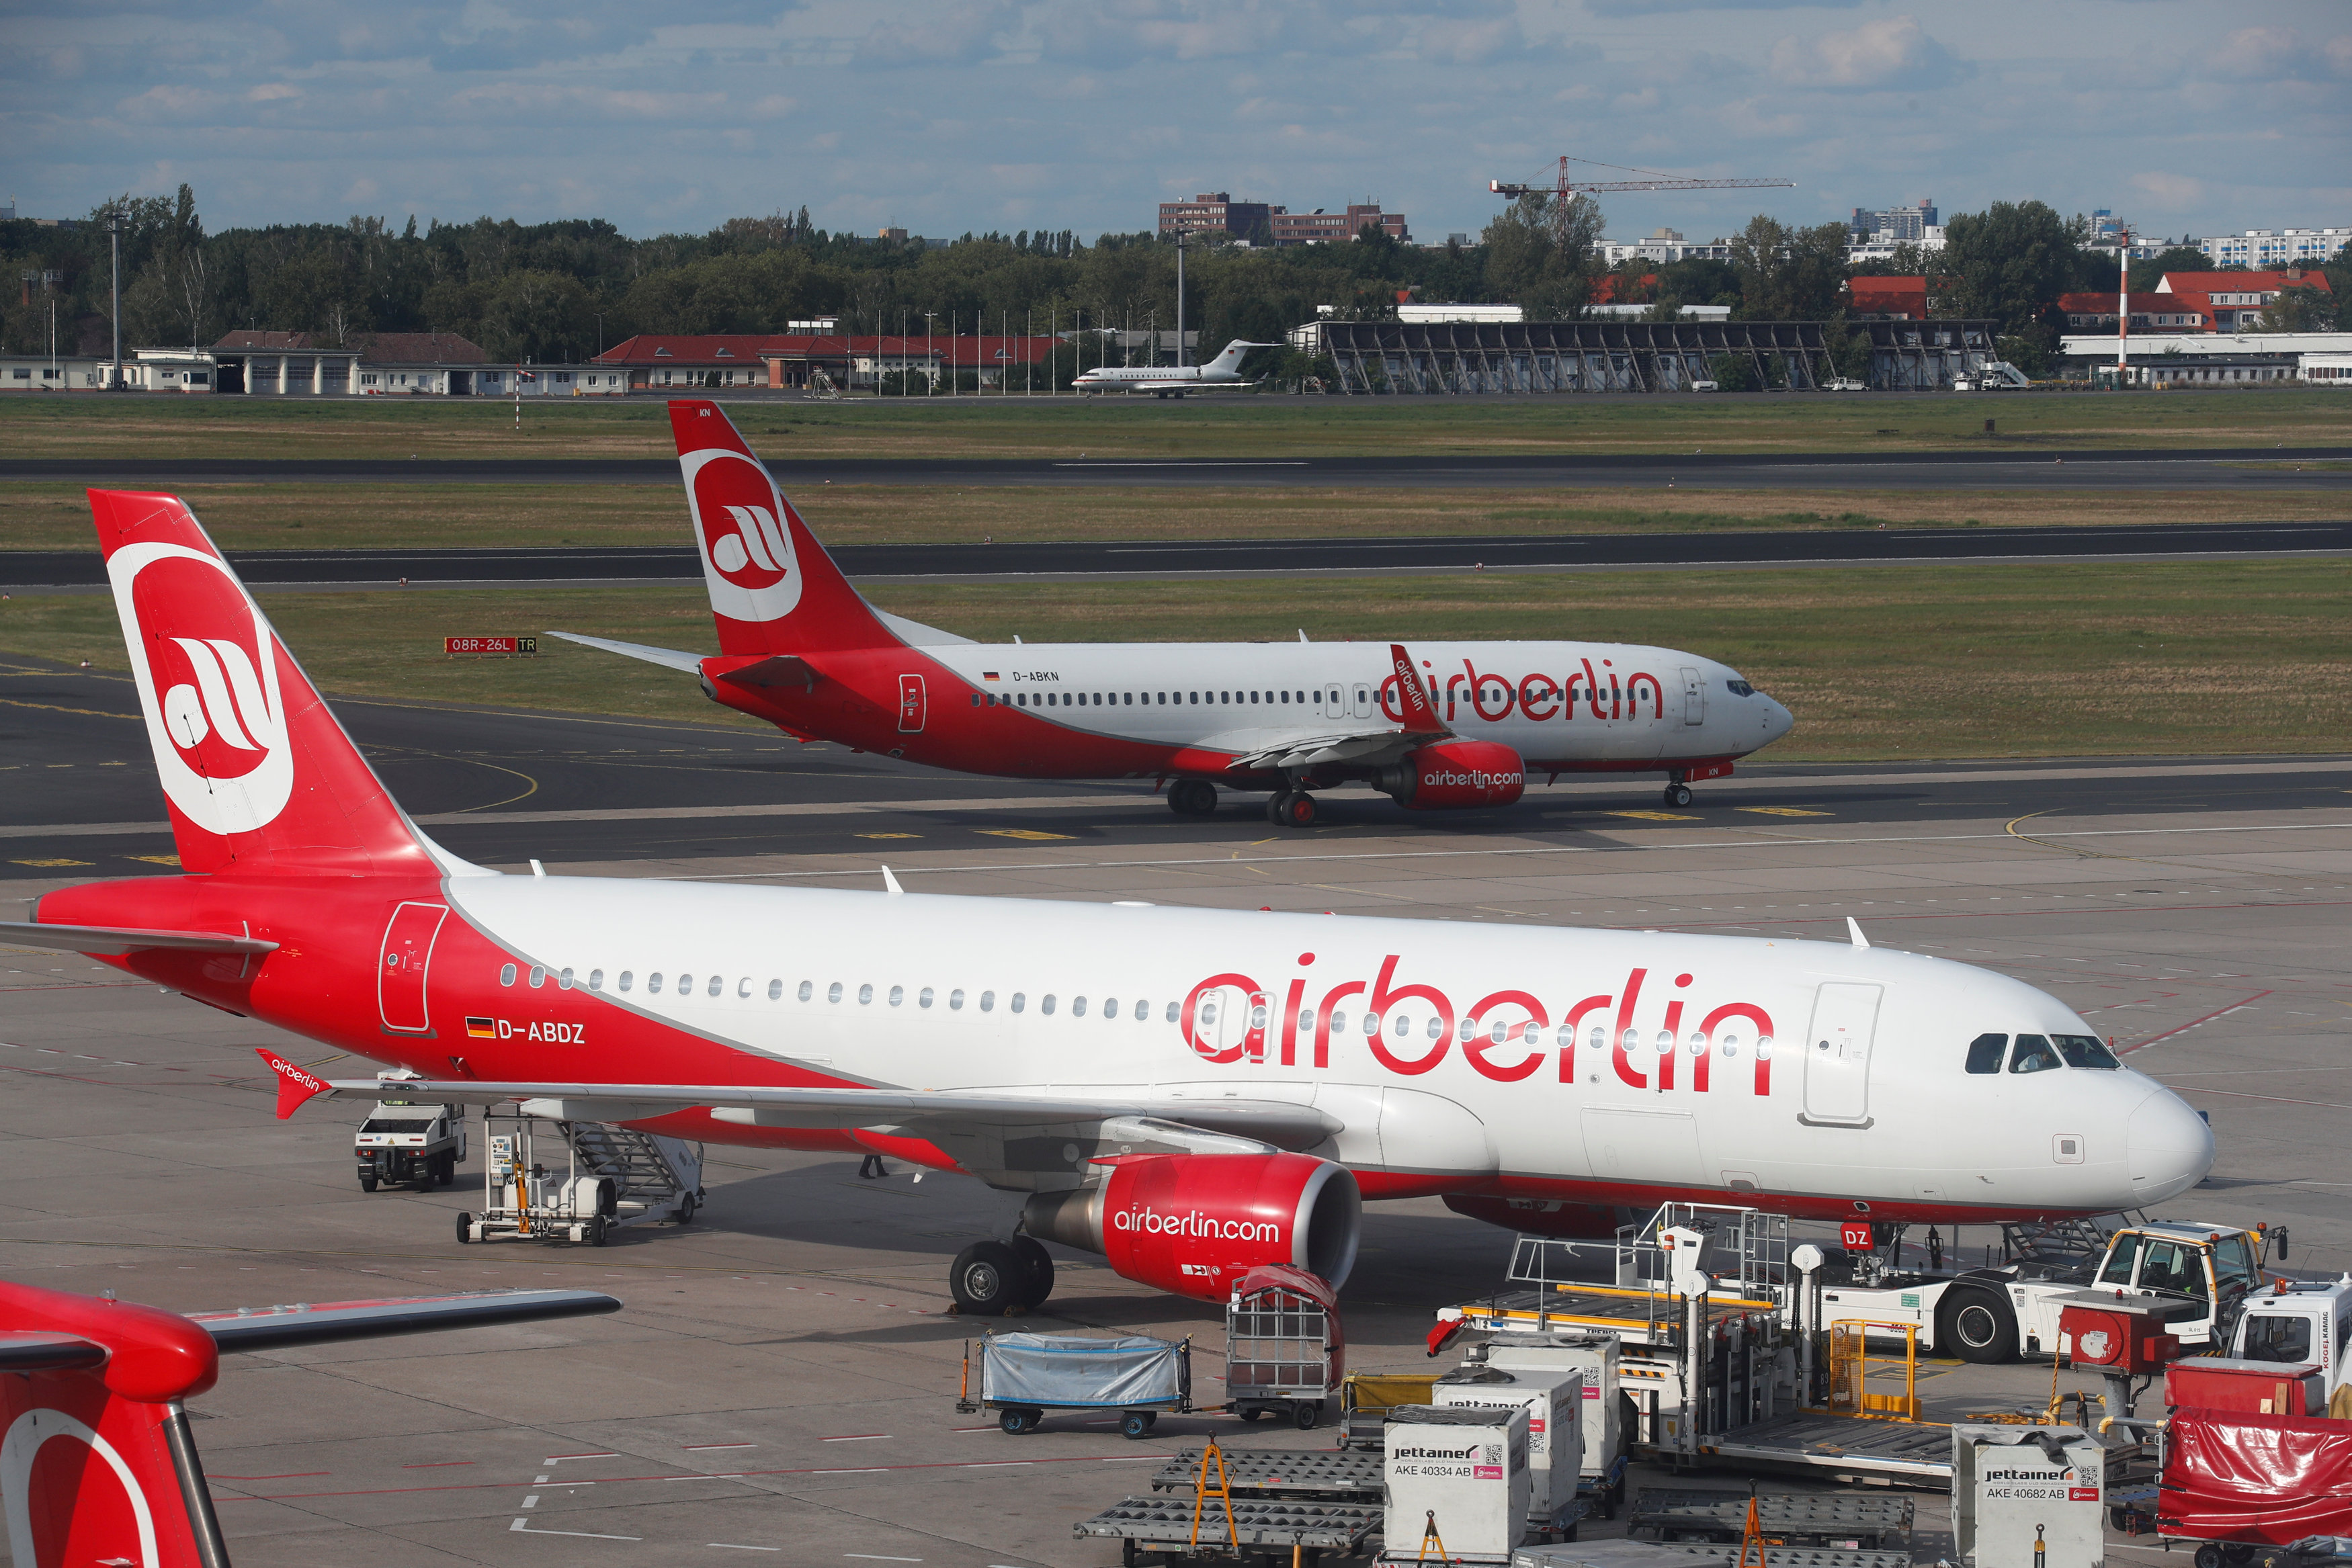 German carrier Air Berlin aircrafts are pictured at Tegel airport in Berlin